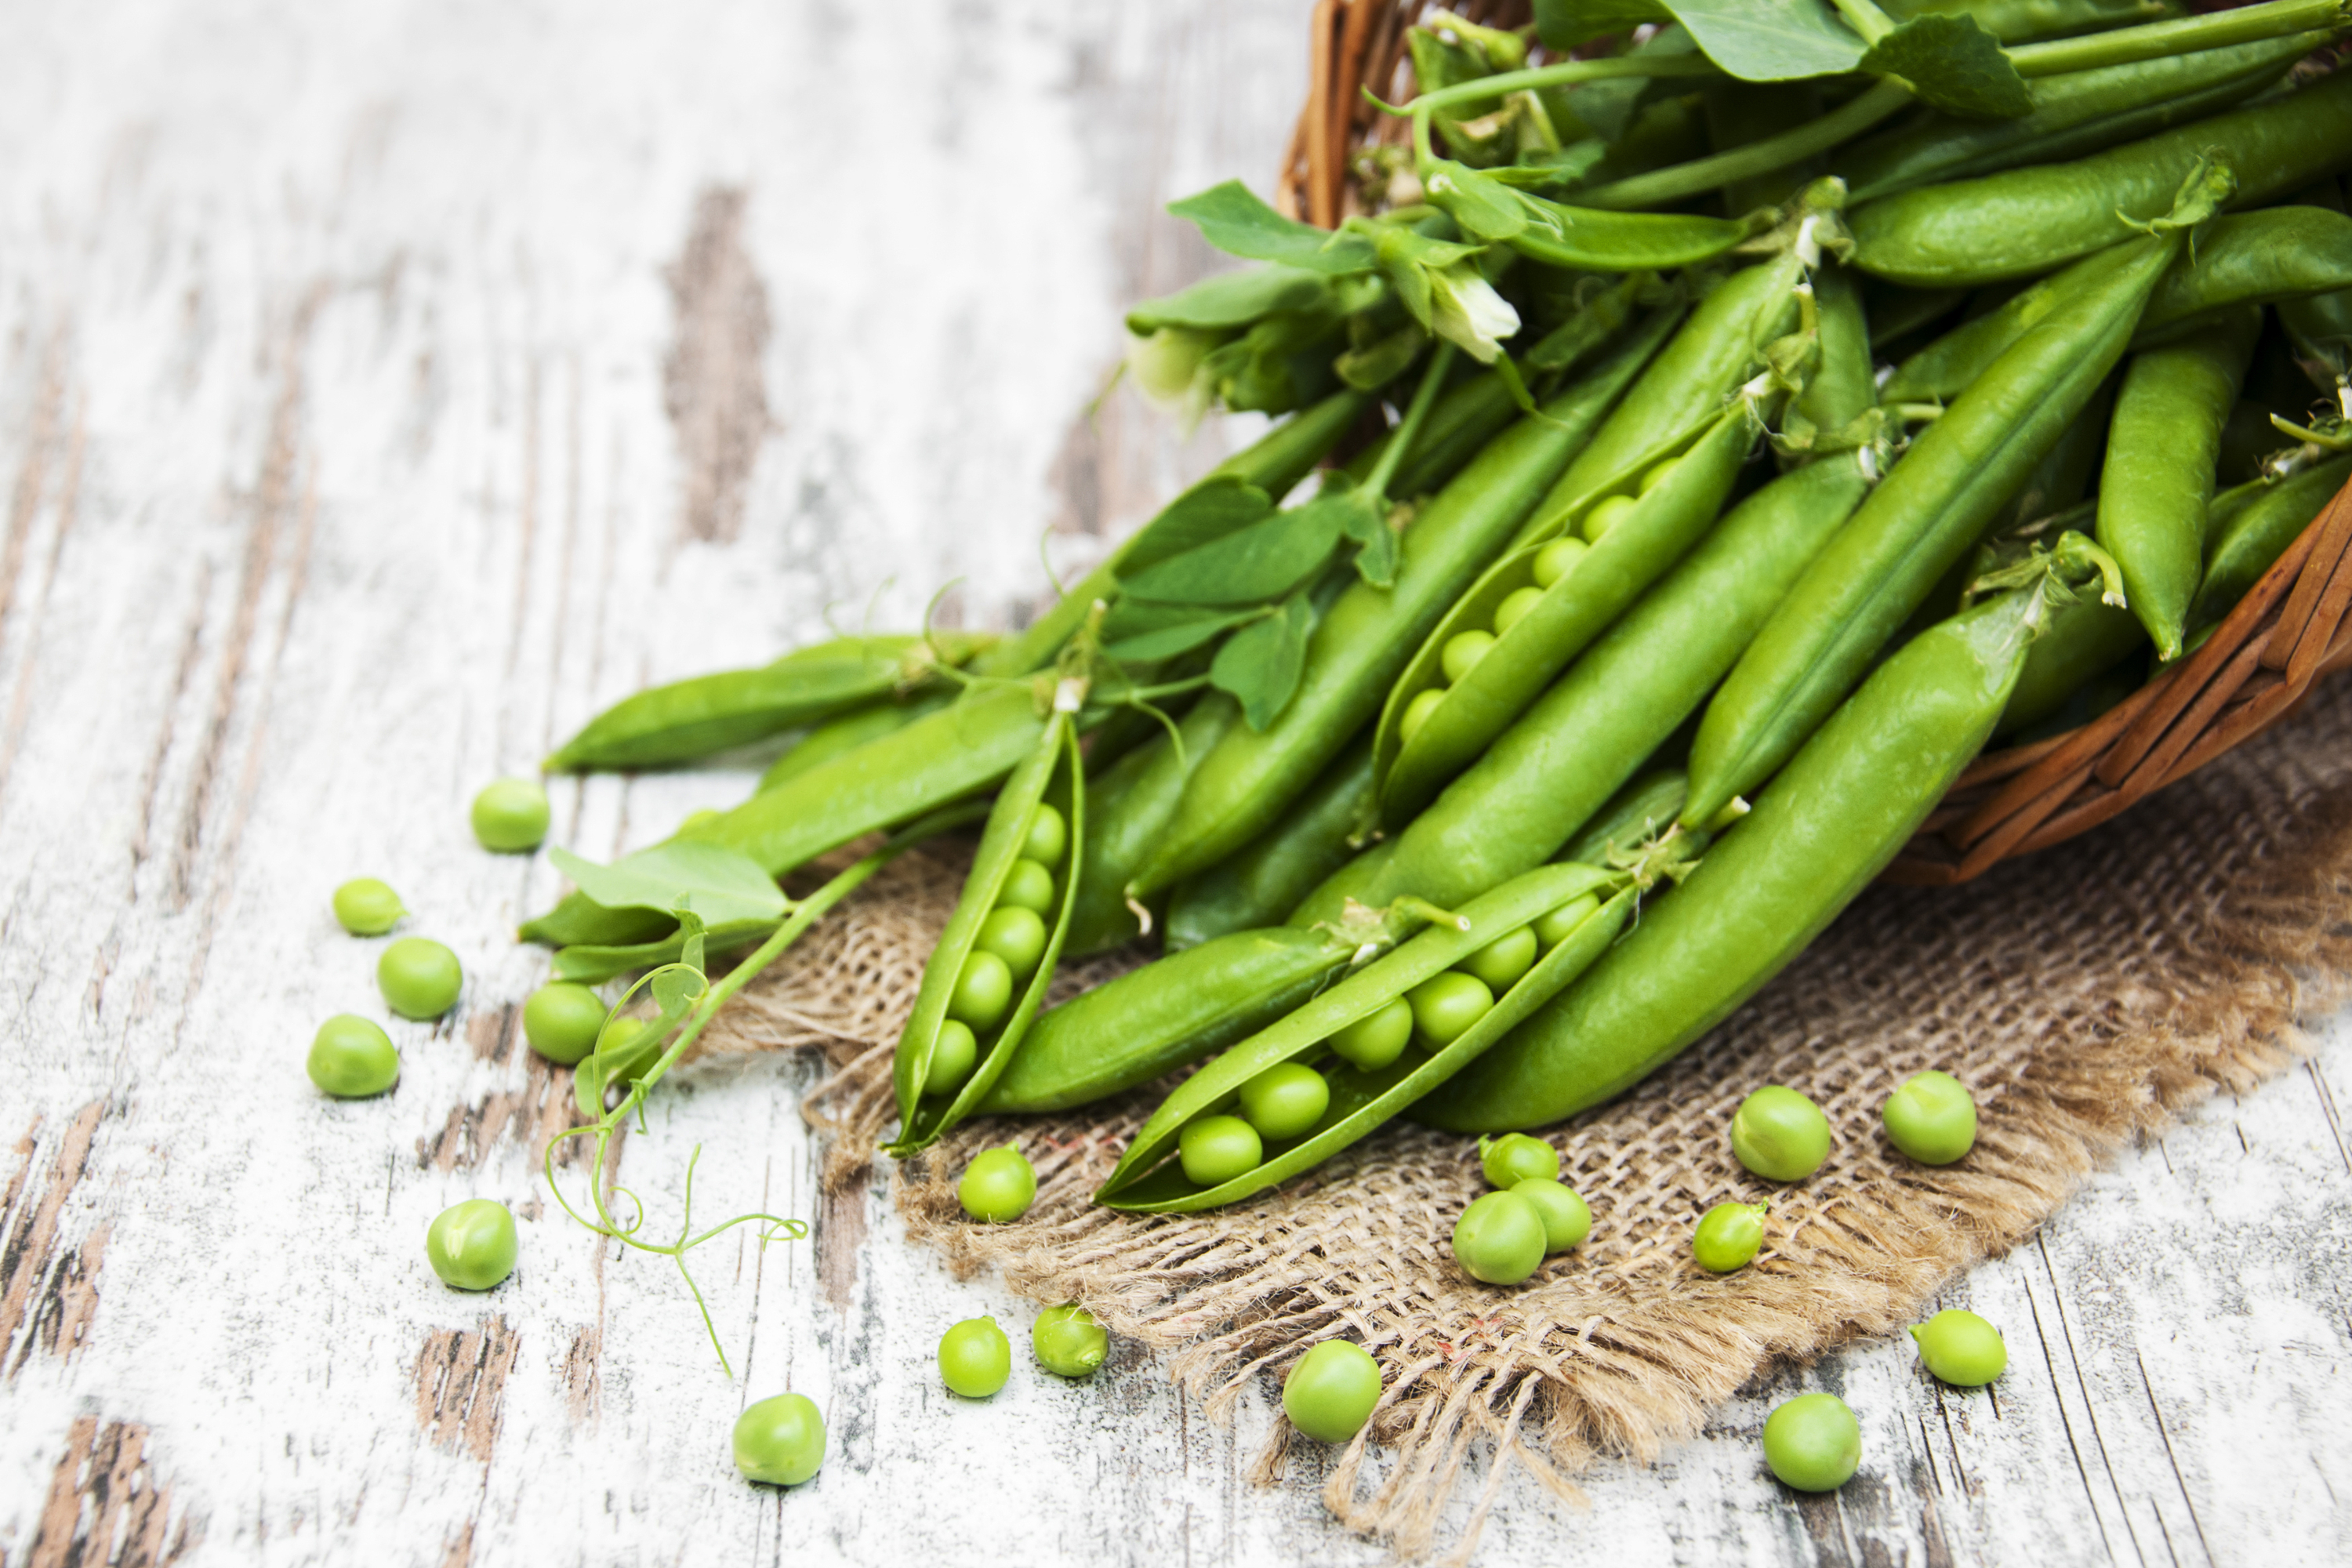  What you need to know about growing sugar snap peas in containers